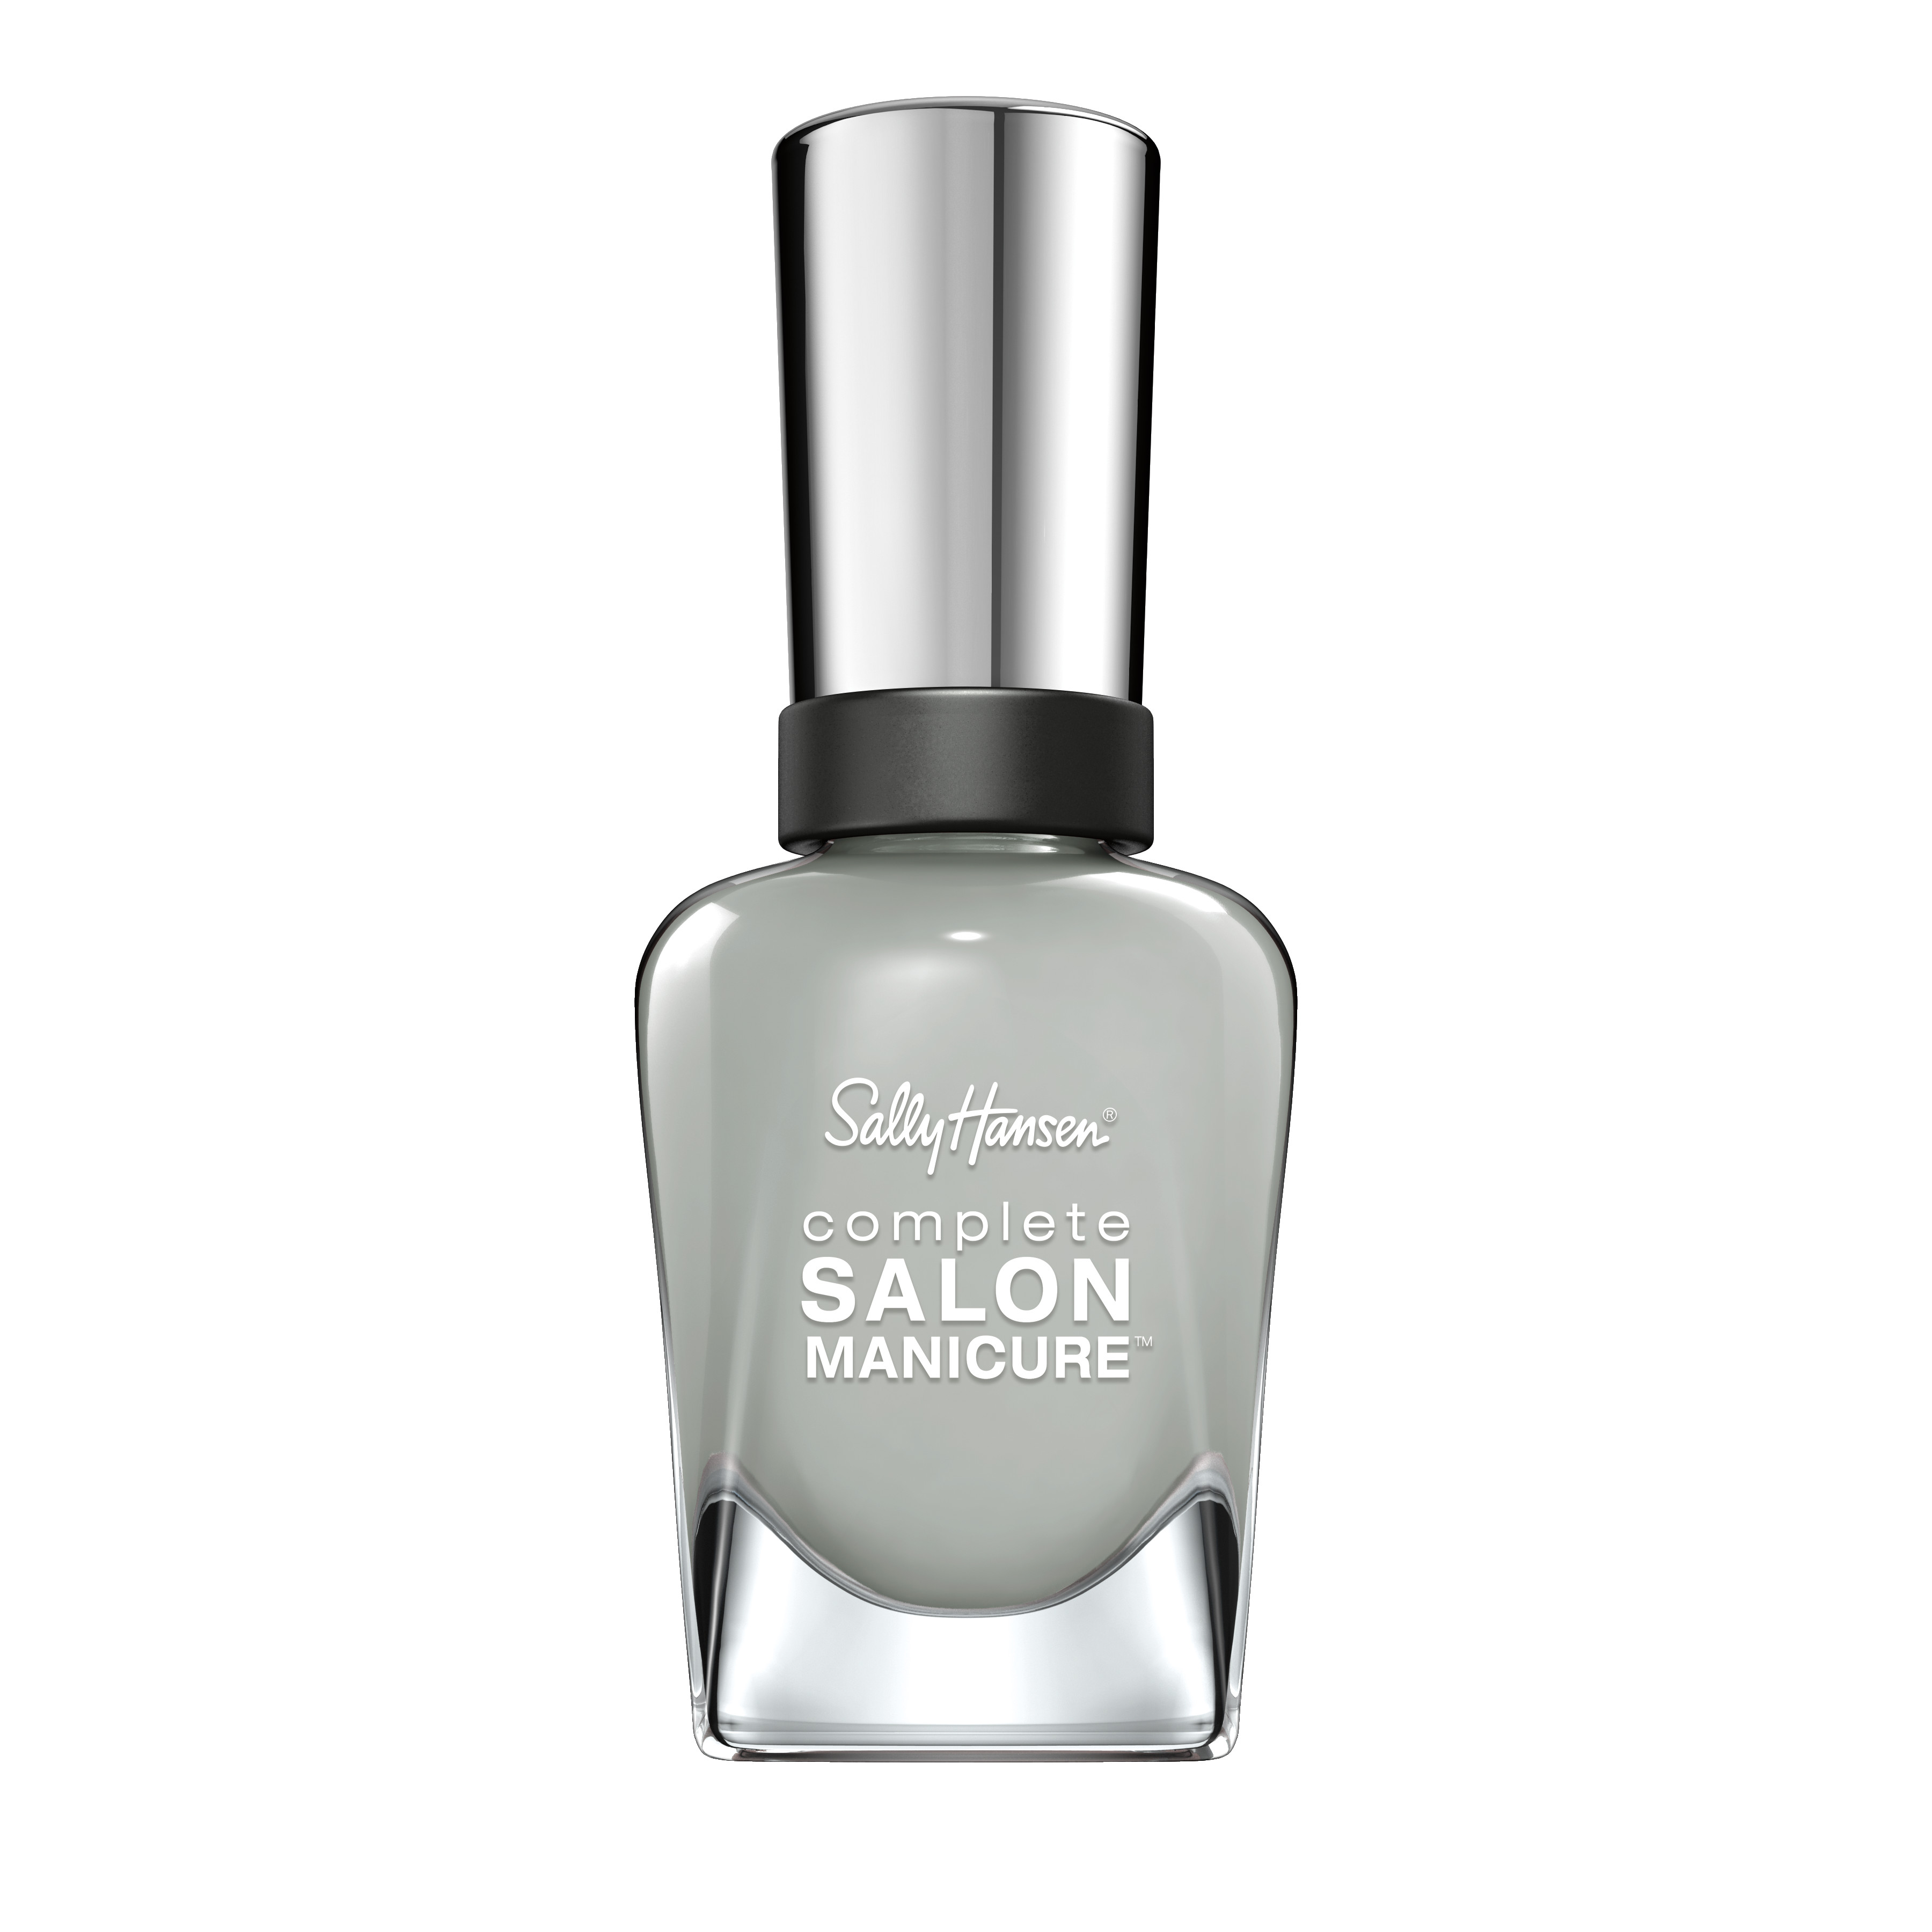 Sally Hansen Complete Salon Manicure Nail Color, All Grey All Night - image 1 of 7